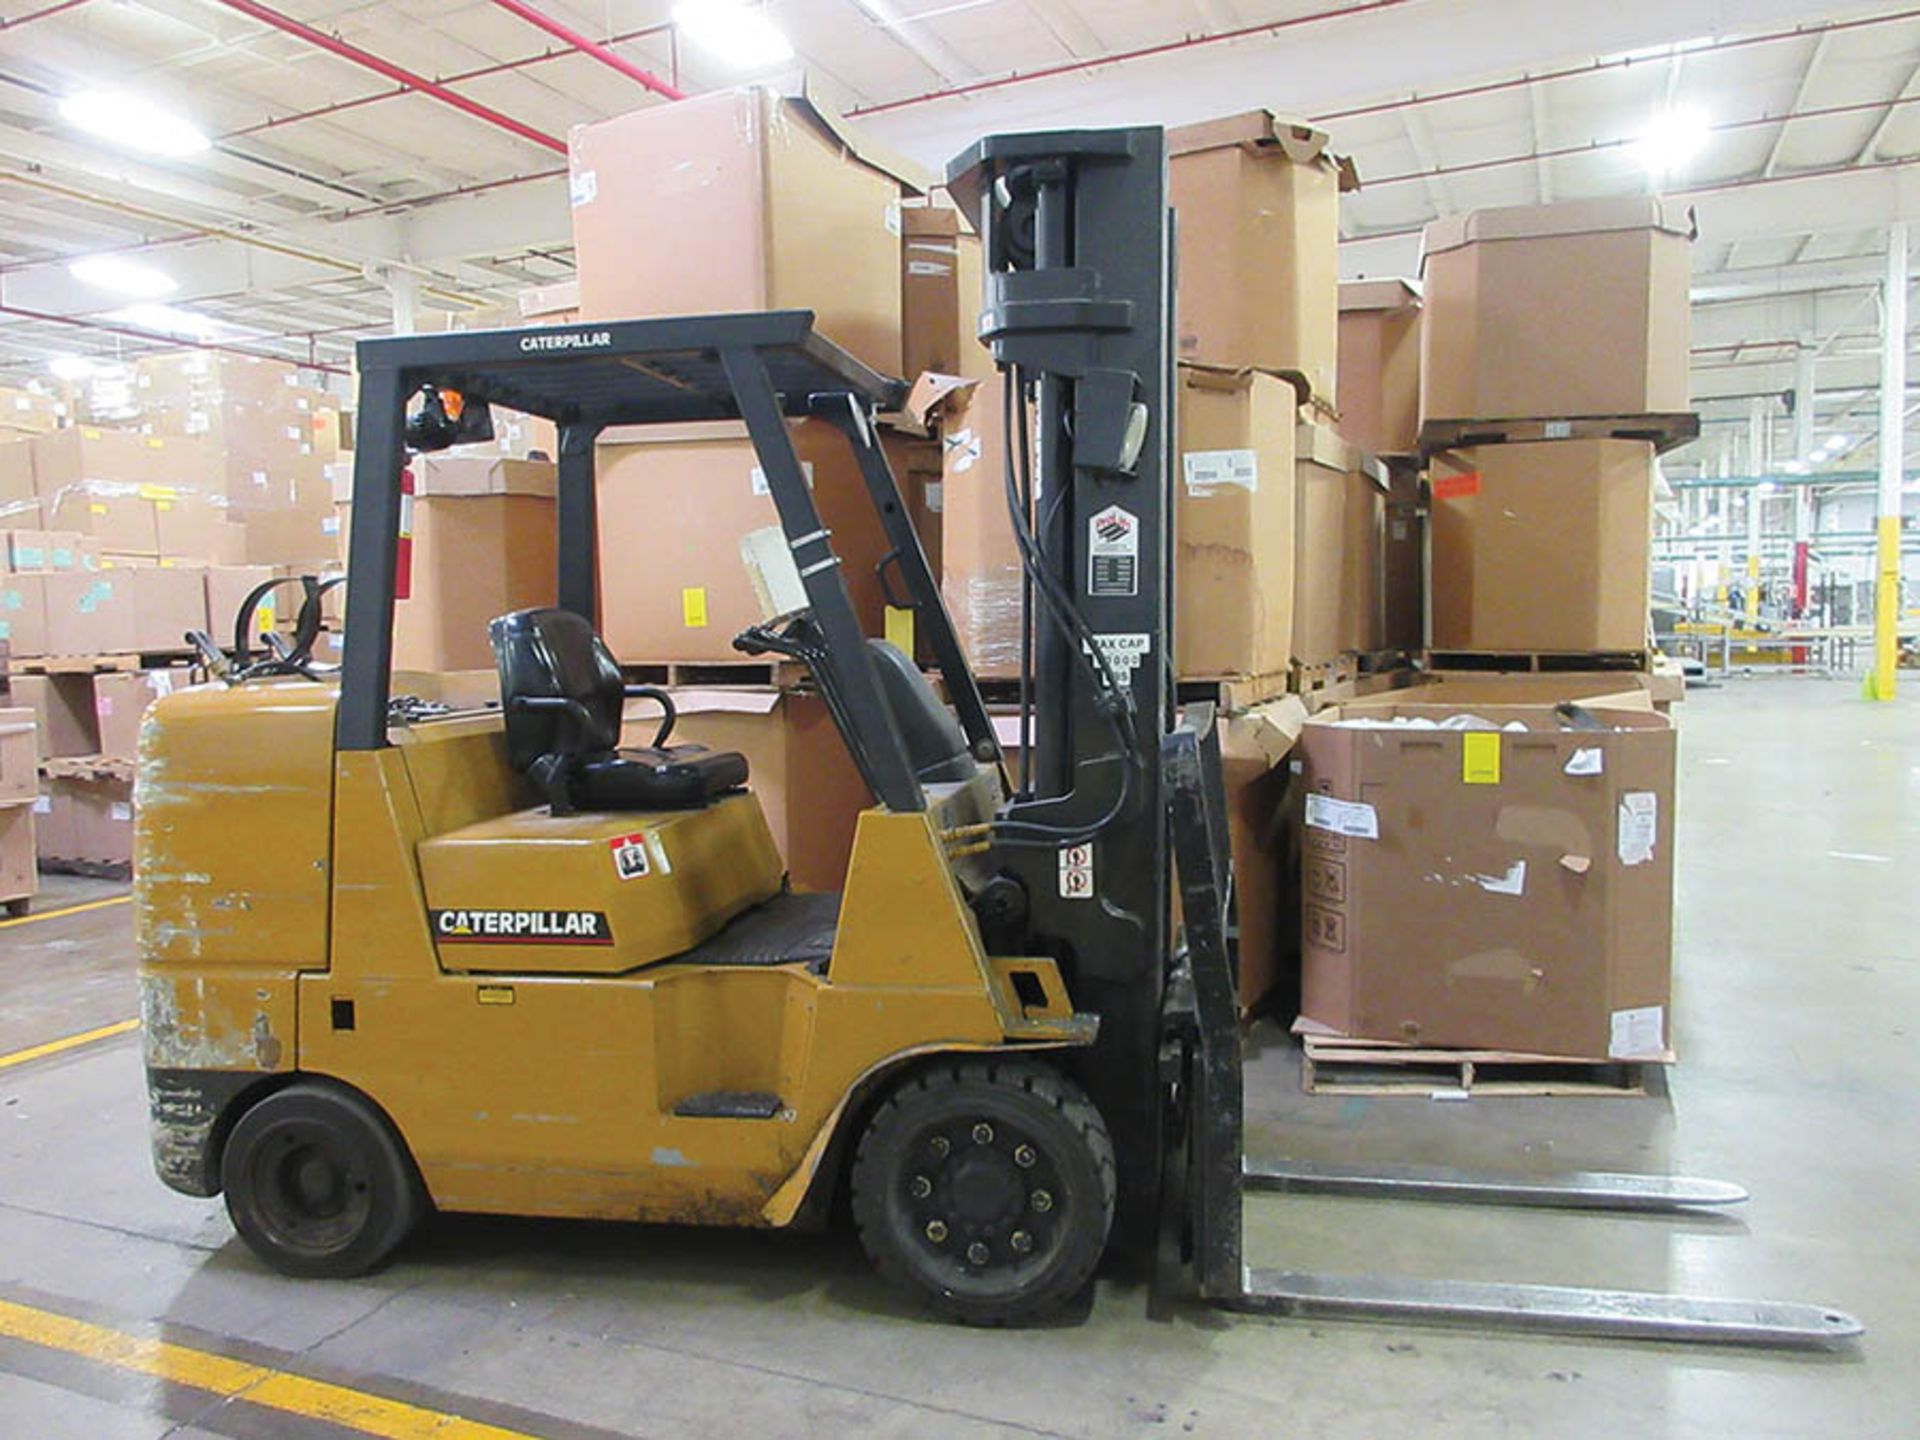 CATERPILLAR 10,000-LB. CAP. LPG FORKLIFT, 3-STAGE MAST, SIDE SHIFT, 209'' MAX LOAD HEIGHT, LEVER - Image 2 of 6